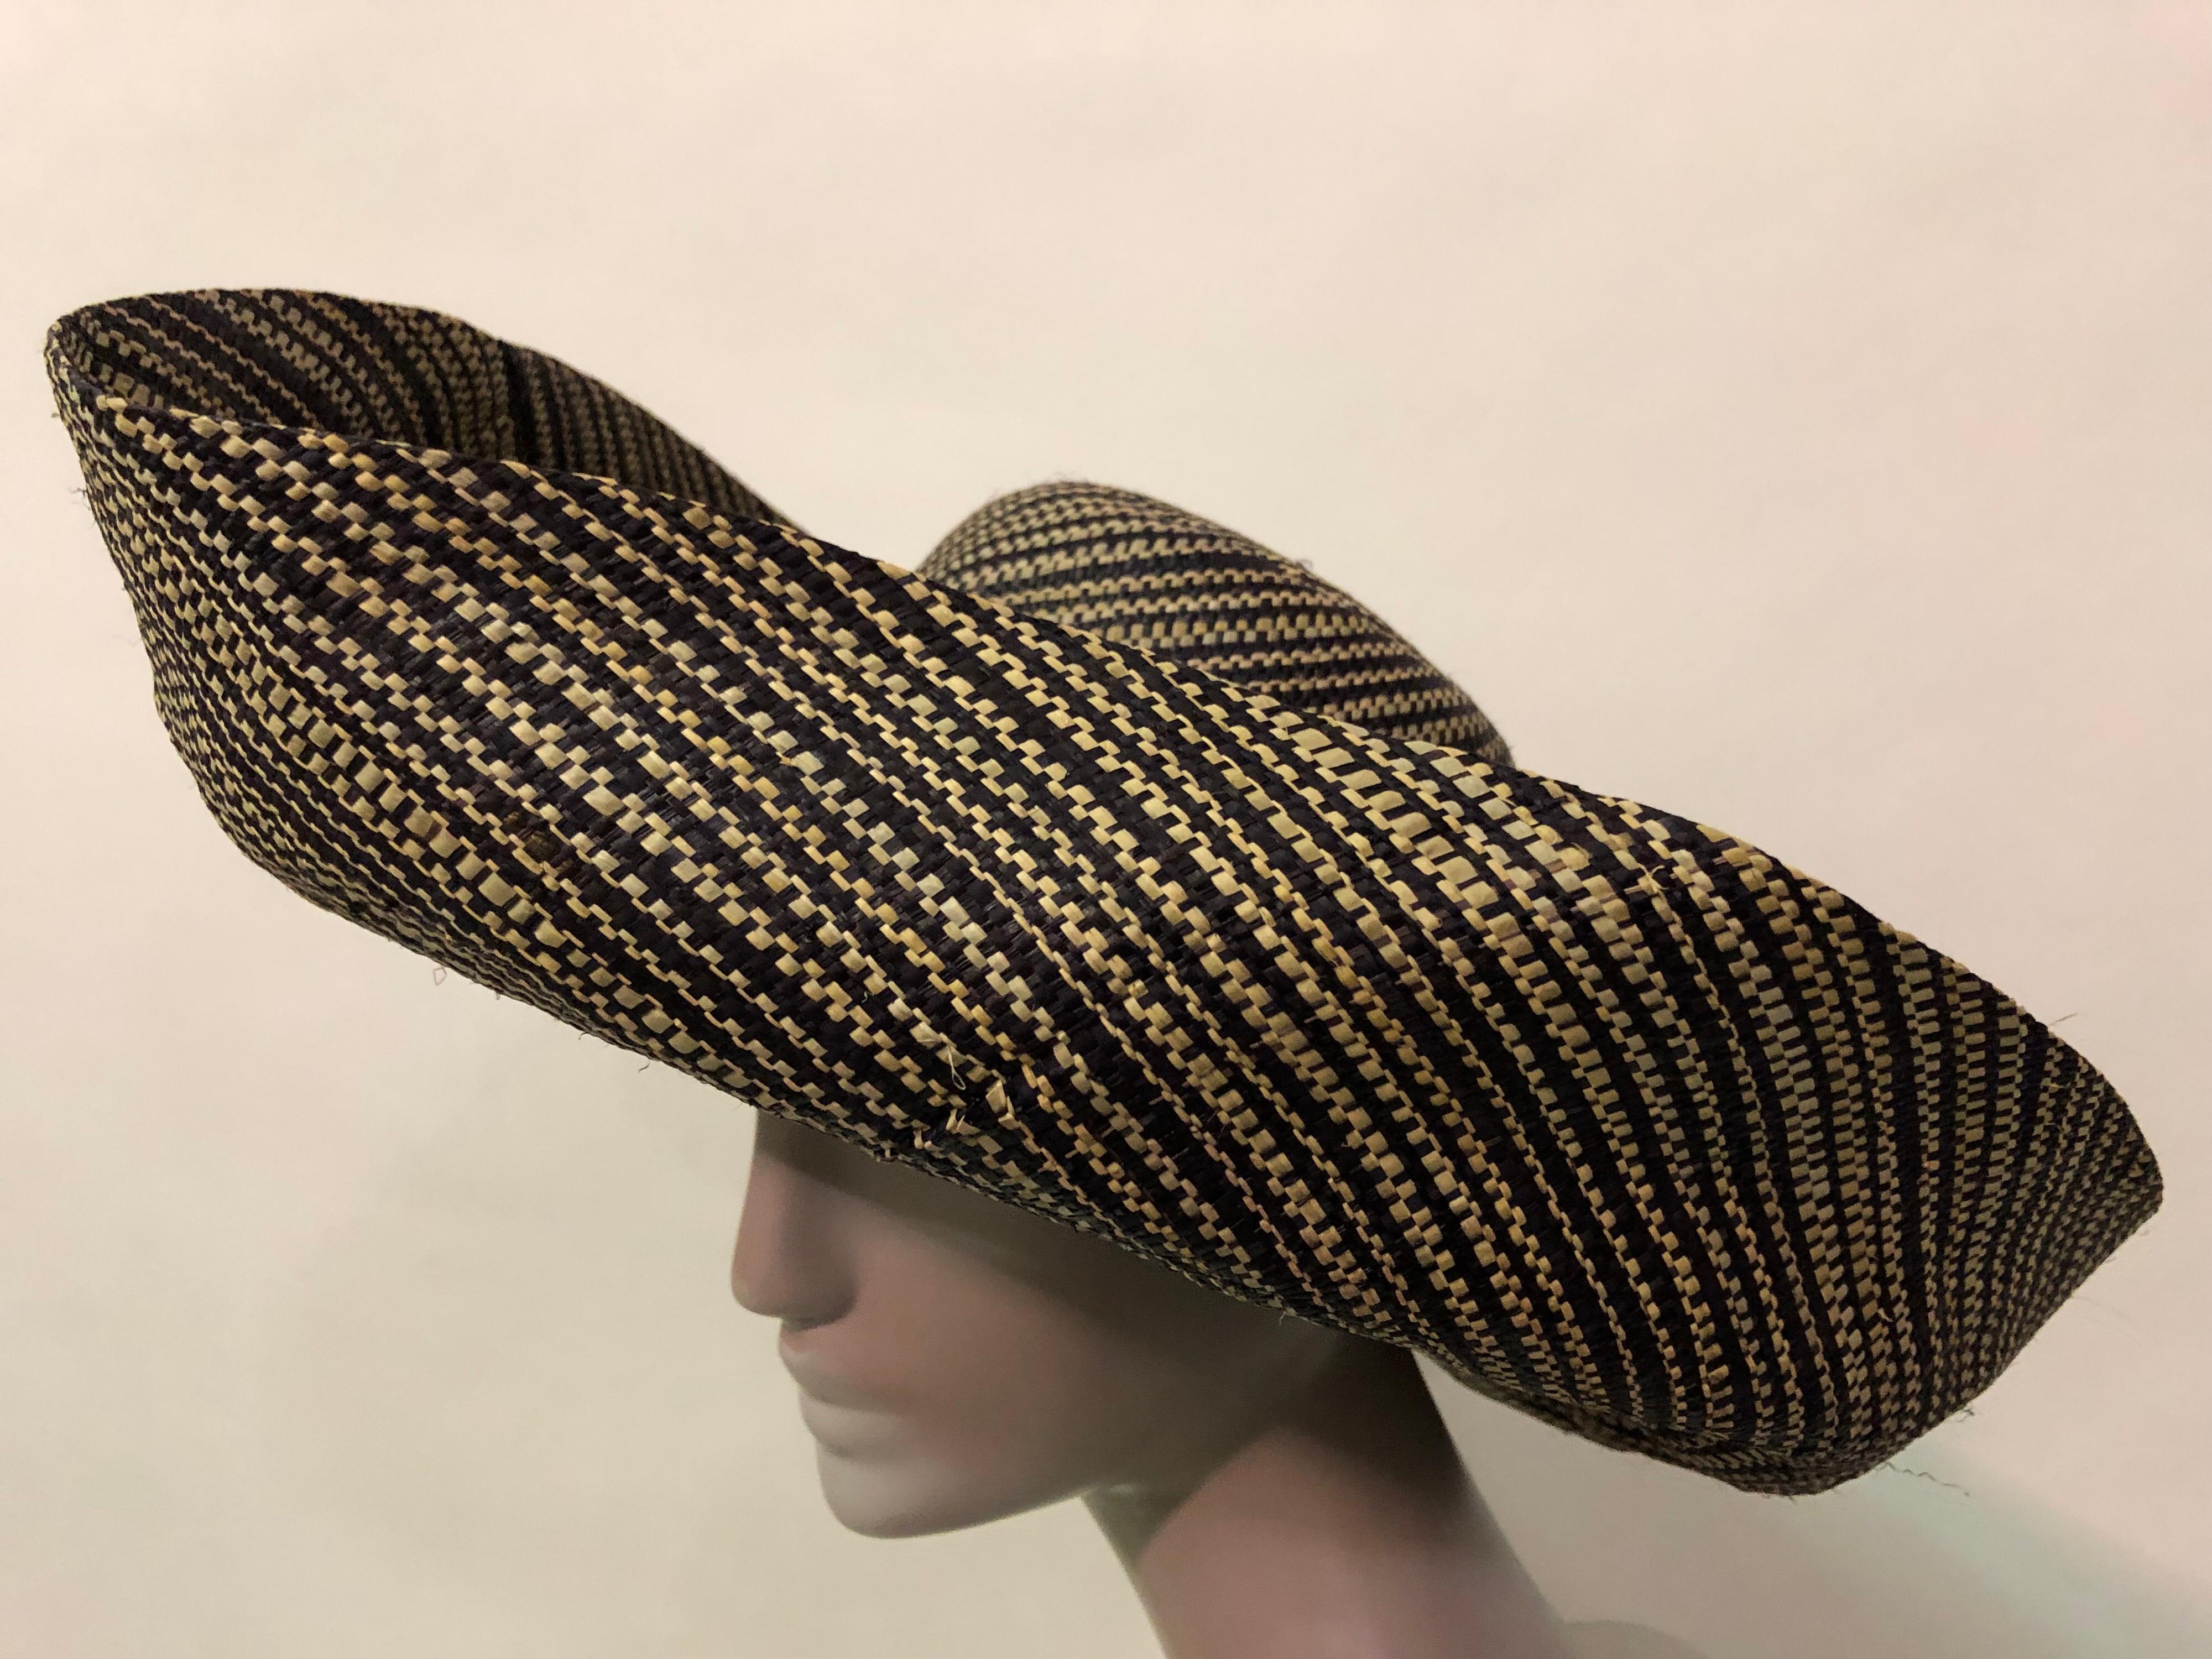 This dramatic 2 tone woven straw hat is most likely from the 1980s
Large turned up brim adds drama to this Summer sunhat. Vintage fruit corsage at the back of hat adds a twist of whimsy.
Fits up to a size large.